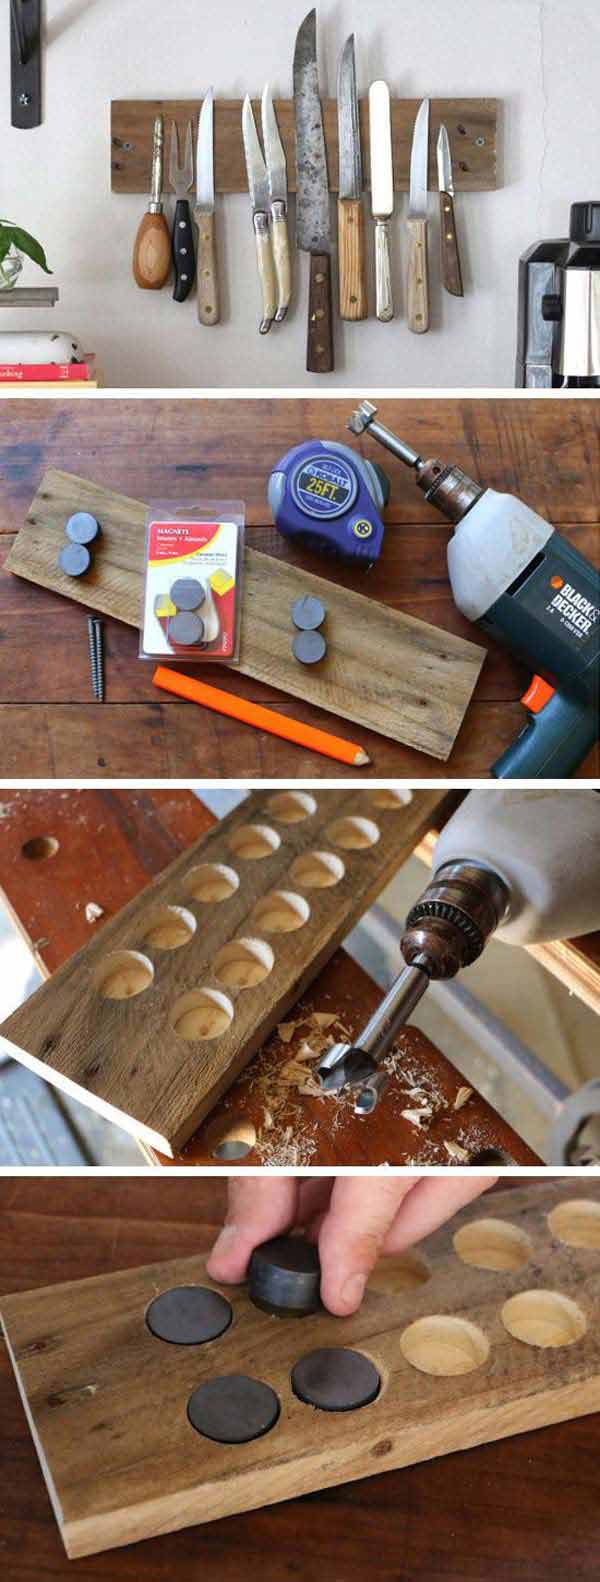 21 Insanely Cool DIY Projects That Will Amaze You - Amazing DIY